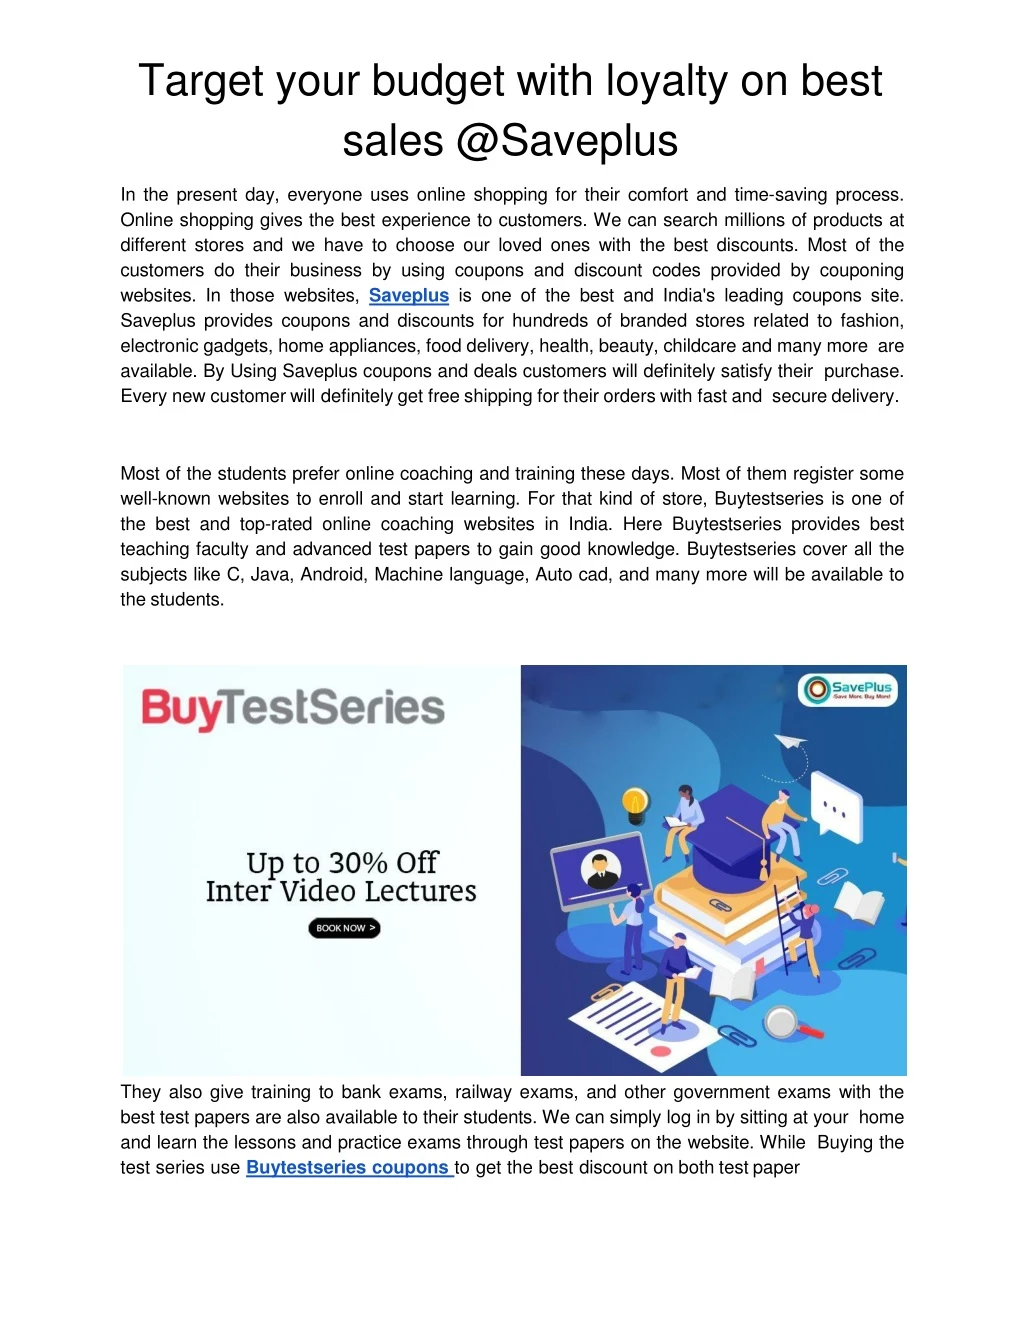 target your budget with loyalty on best sales @saveplus